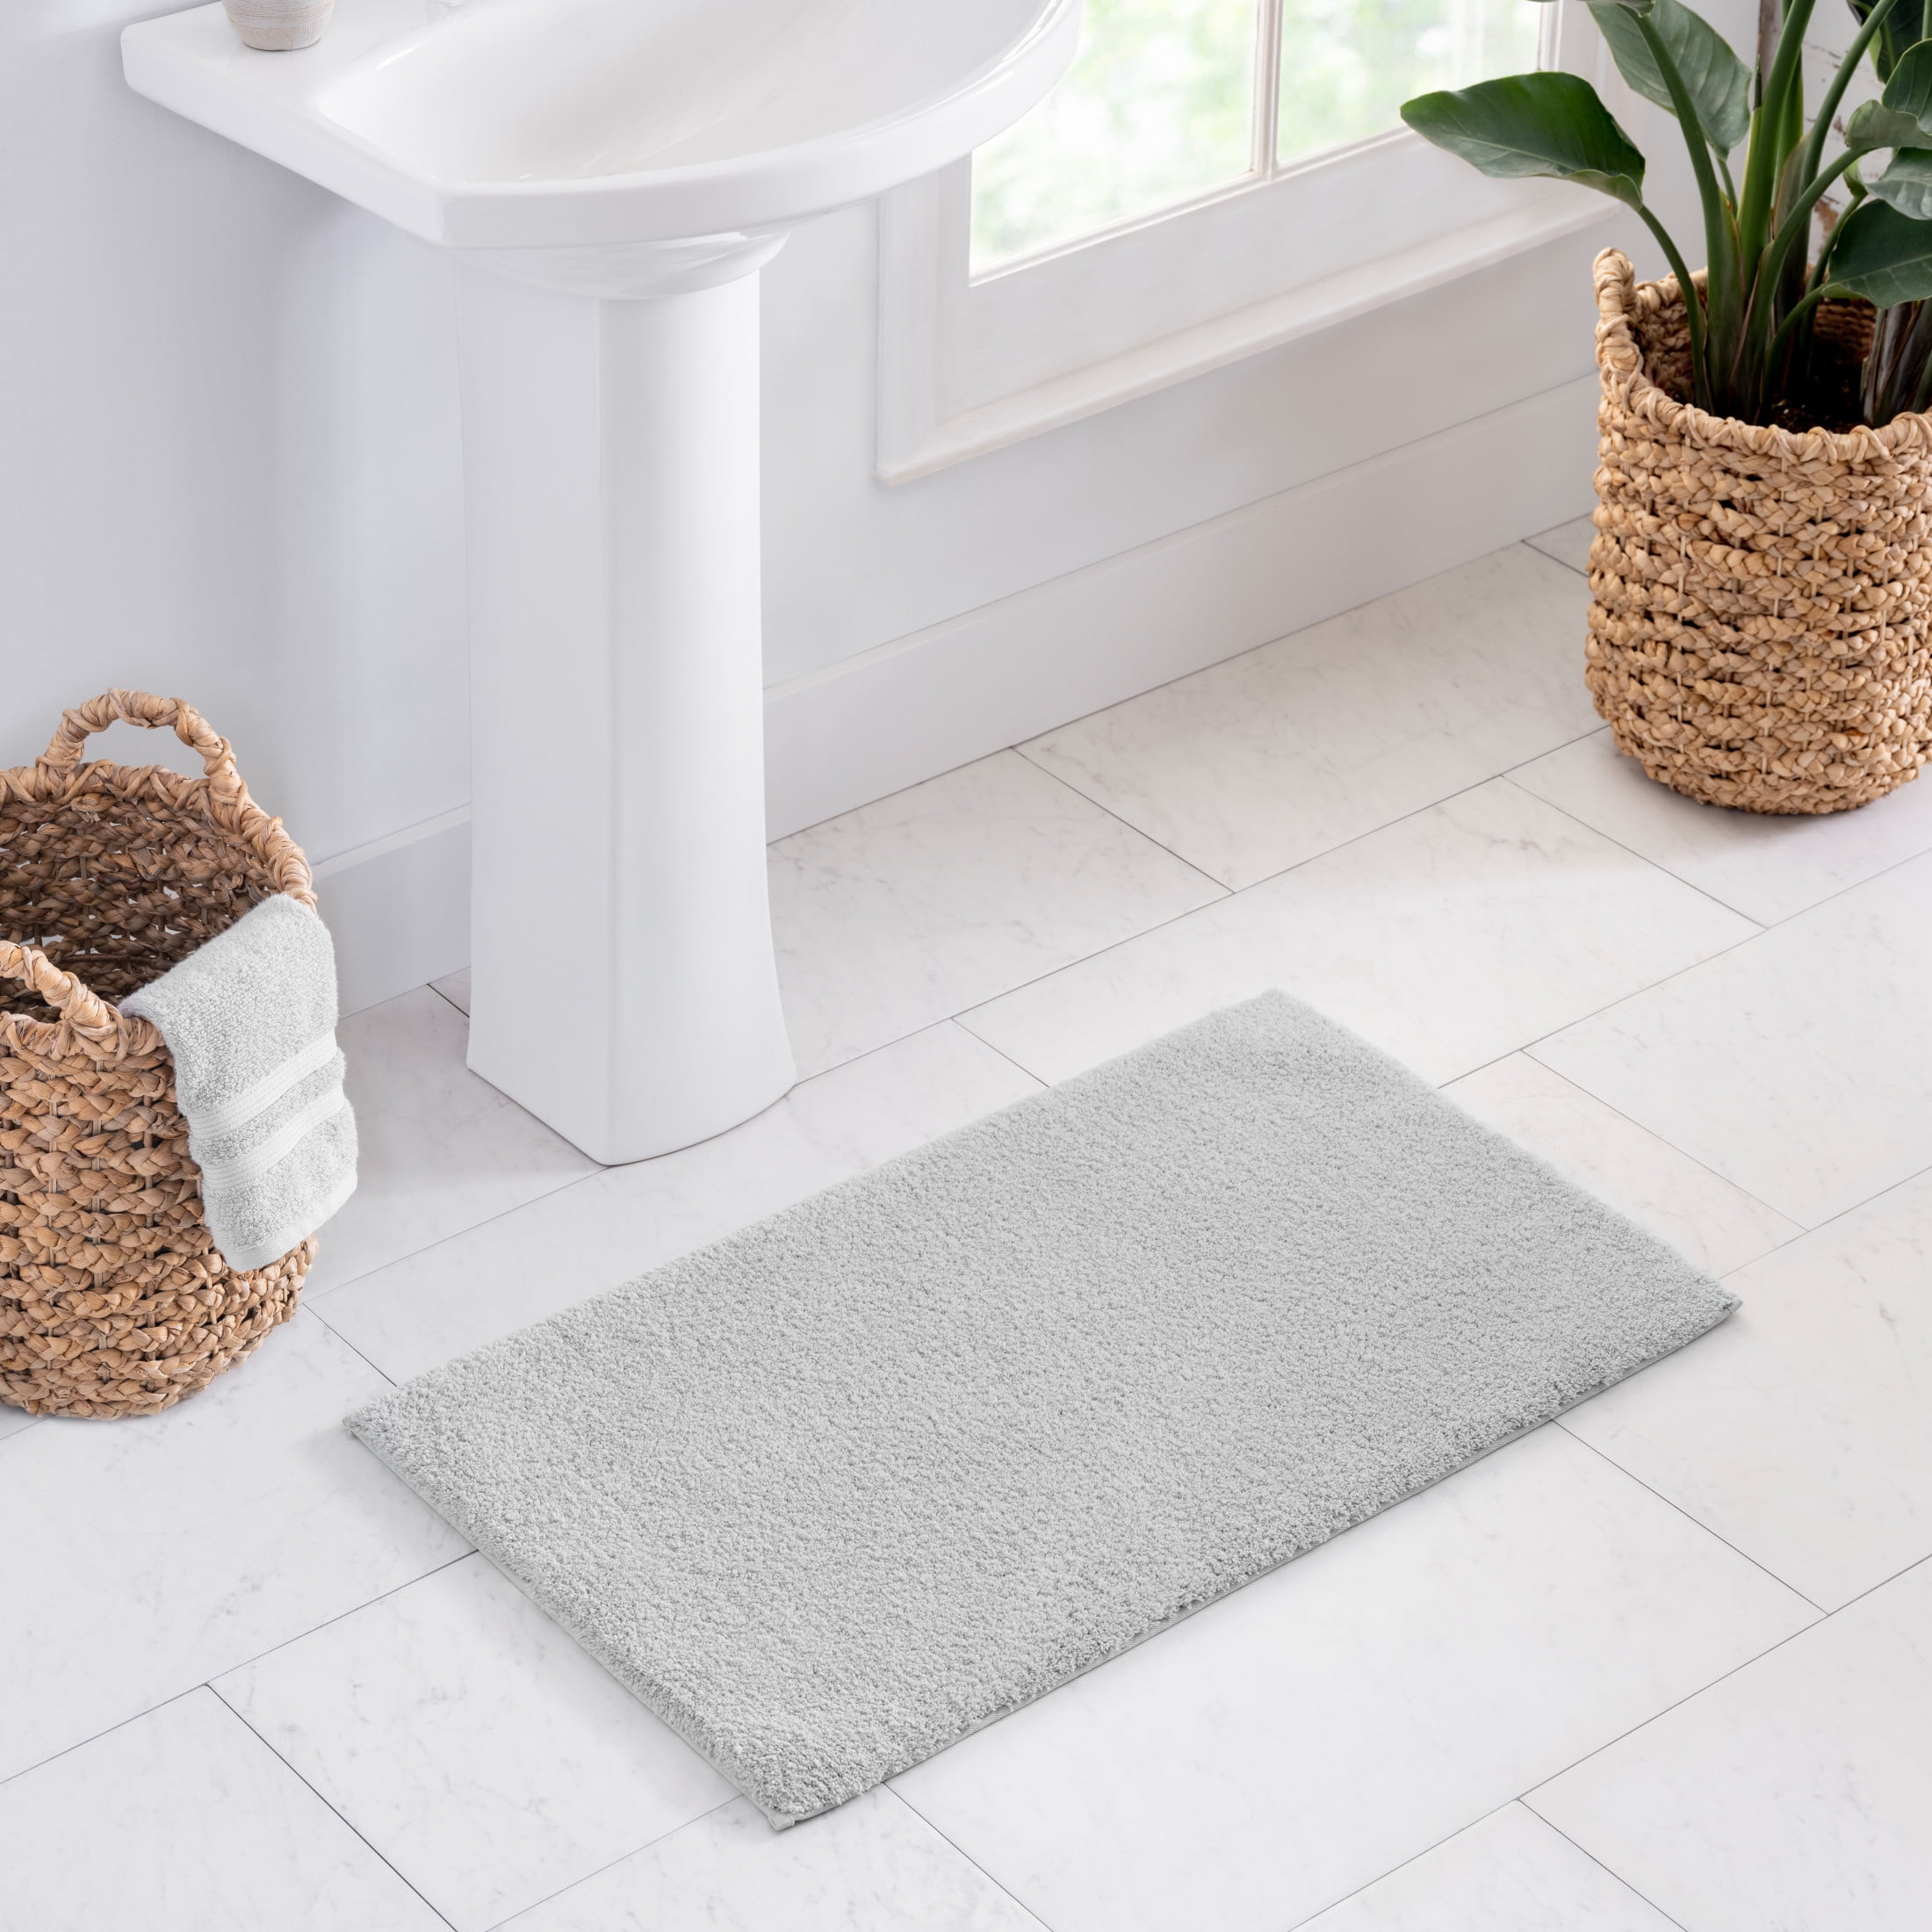 Fabstyles Basix Soft & Absorbent Reversible Cotton Bath Rug - 20 x 32 - Silver